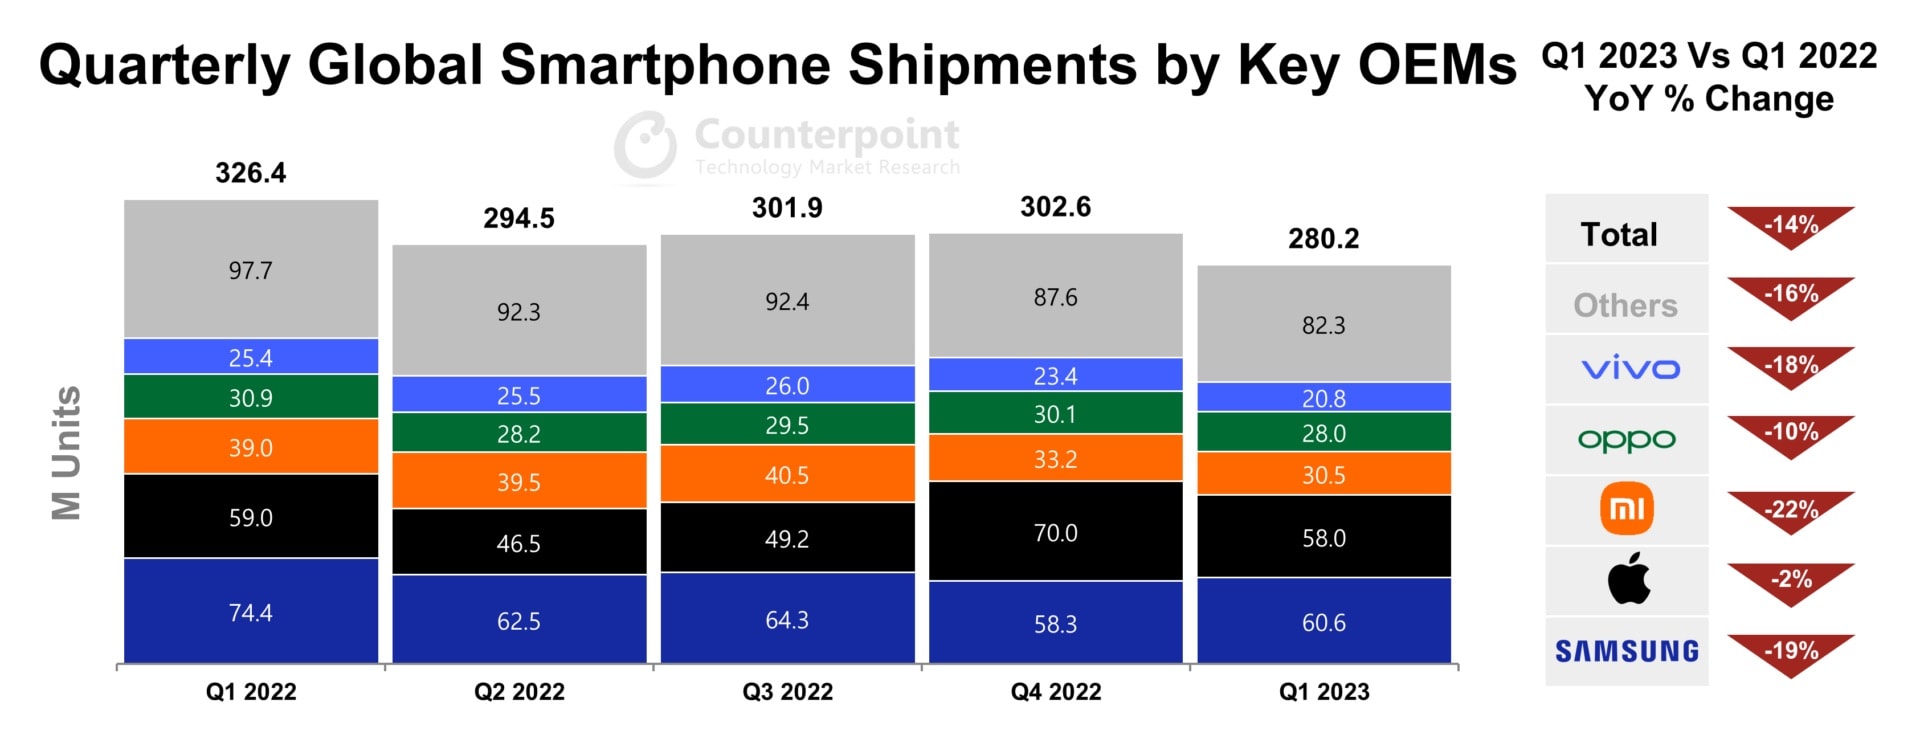 Q1 2023 Global smartphone sales figures from Counterpoint Research.